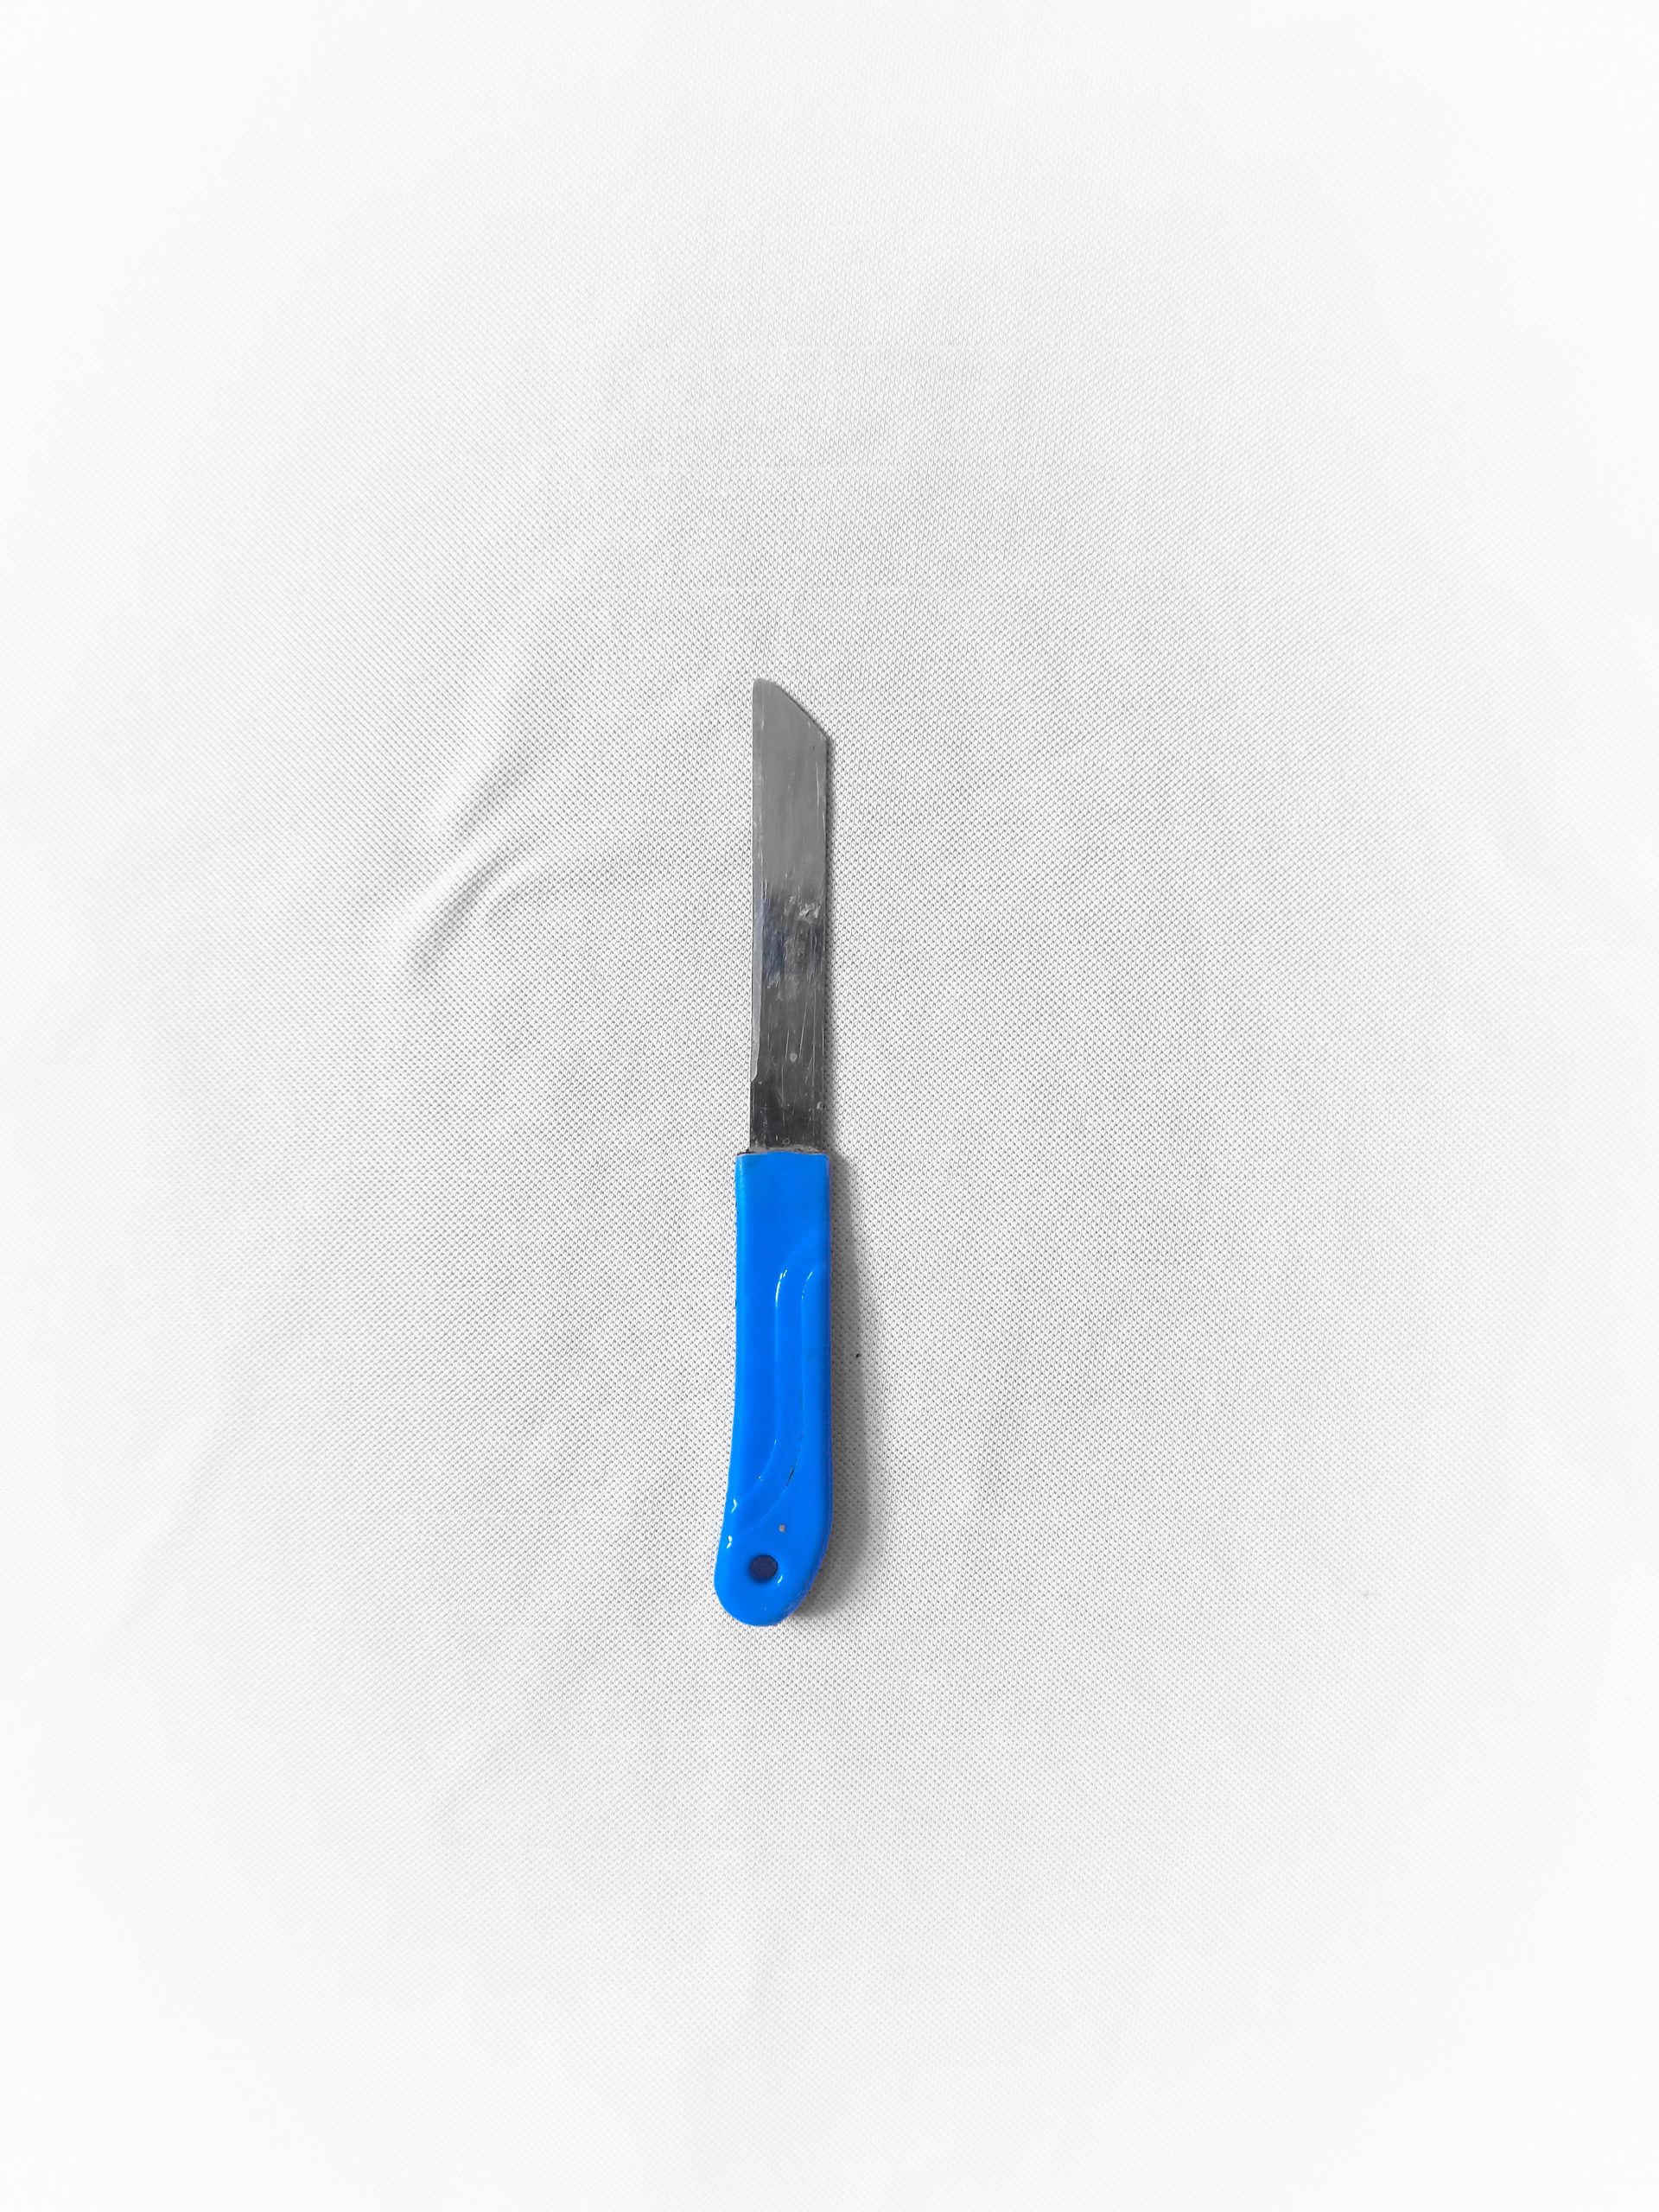 Knife with white background